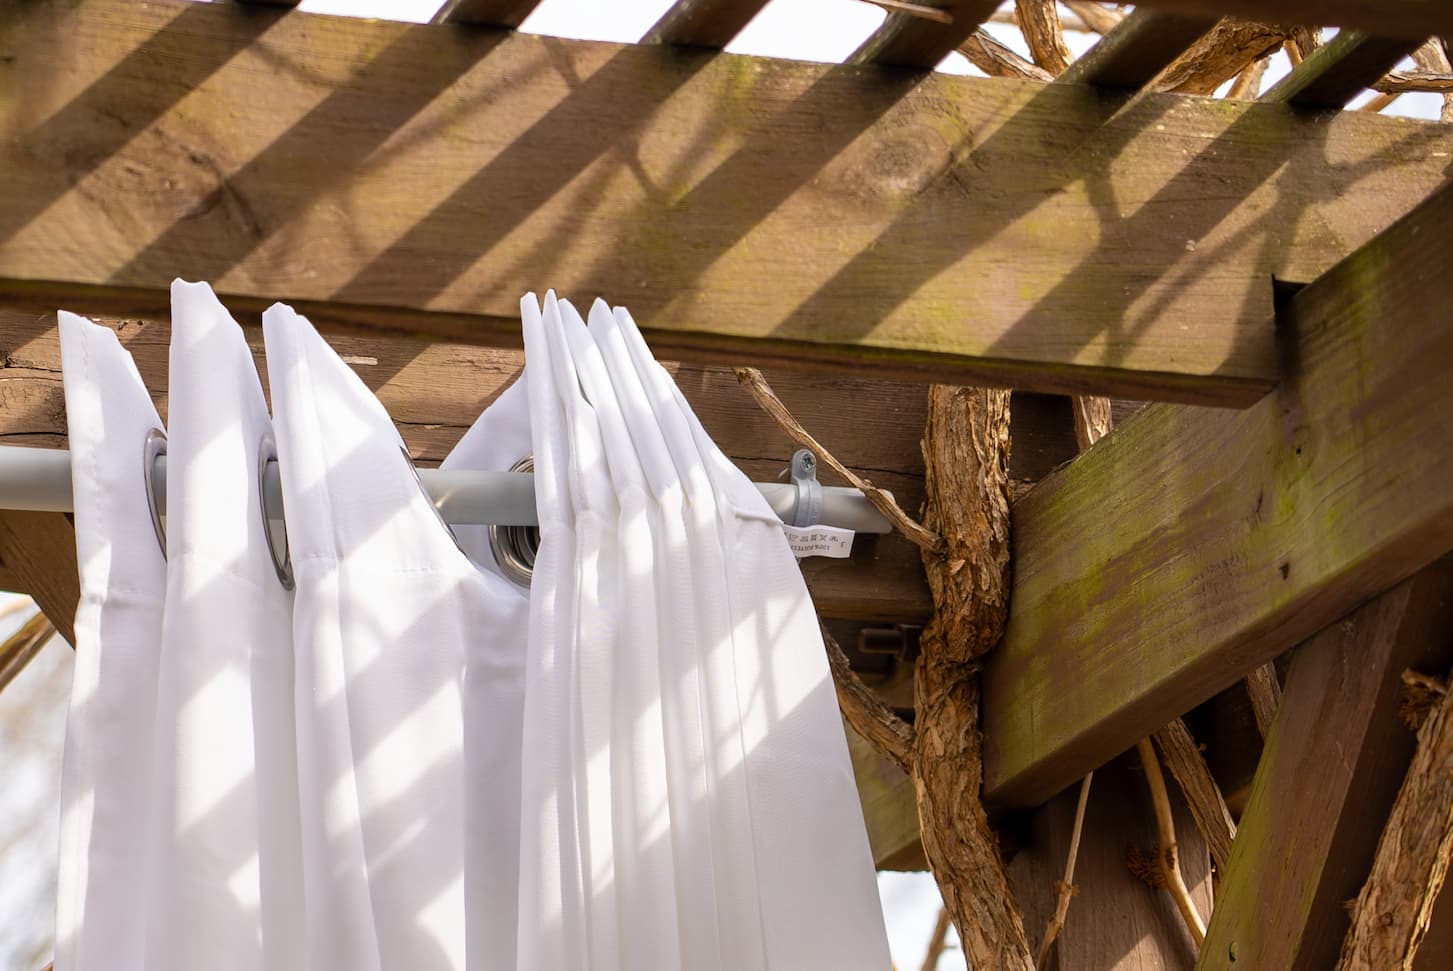 DIY Without Fear | How To Keep Outdoor Curtains From Blowing In The Wind